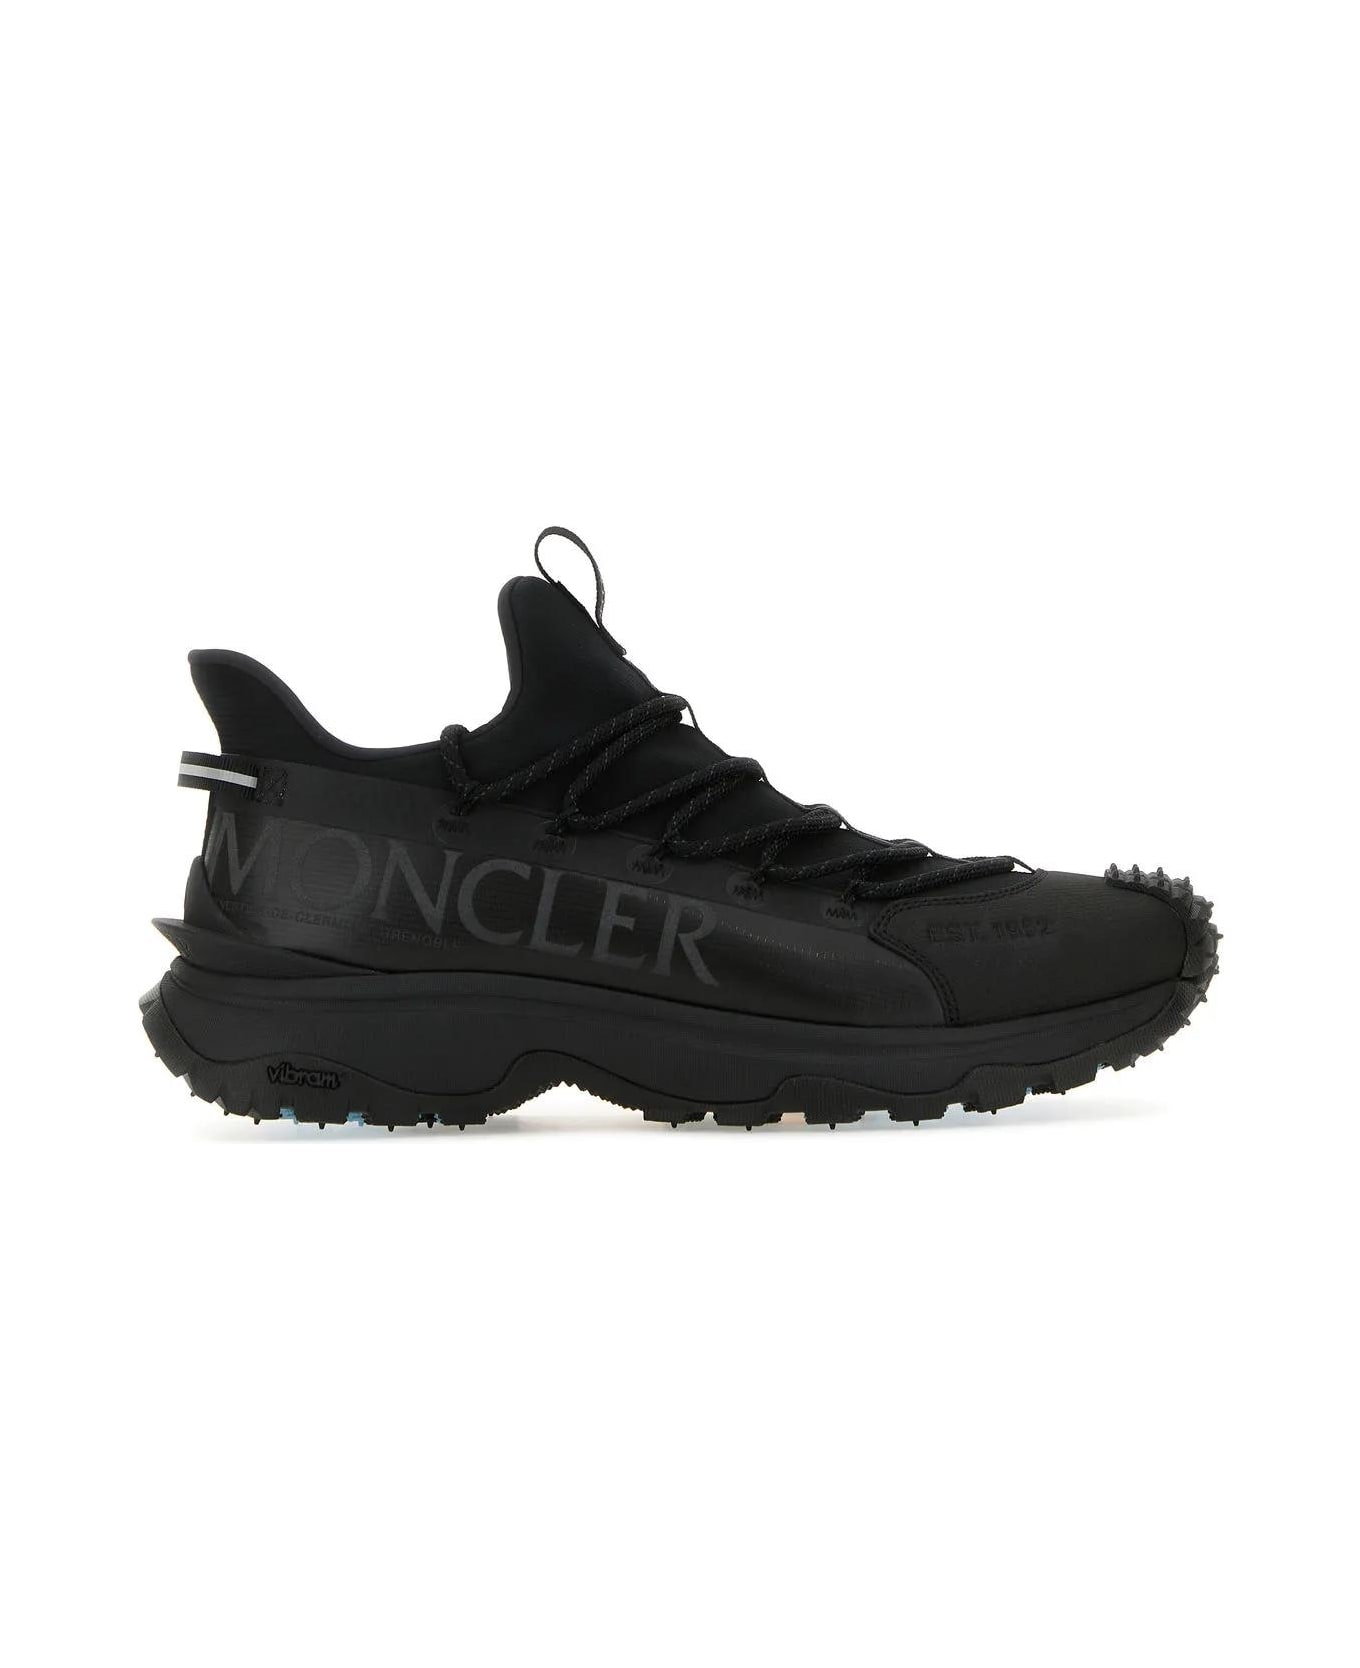 Moncler Black Fabric And Rubber Trailgrip Lite2 Sneakers - BLACK